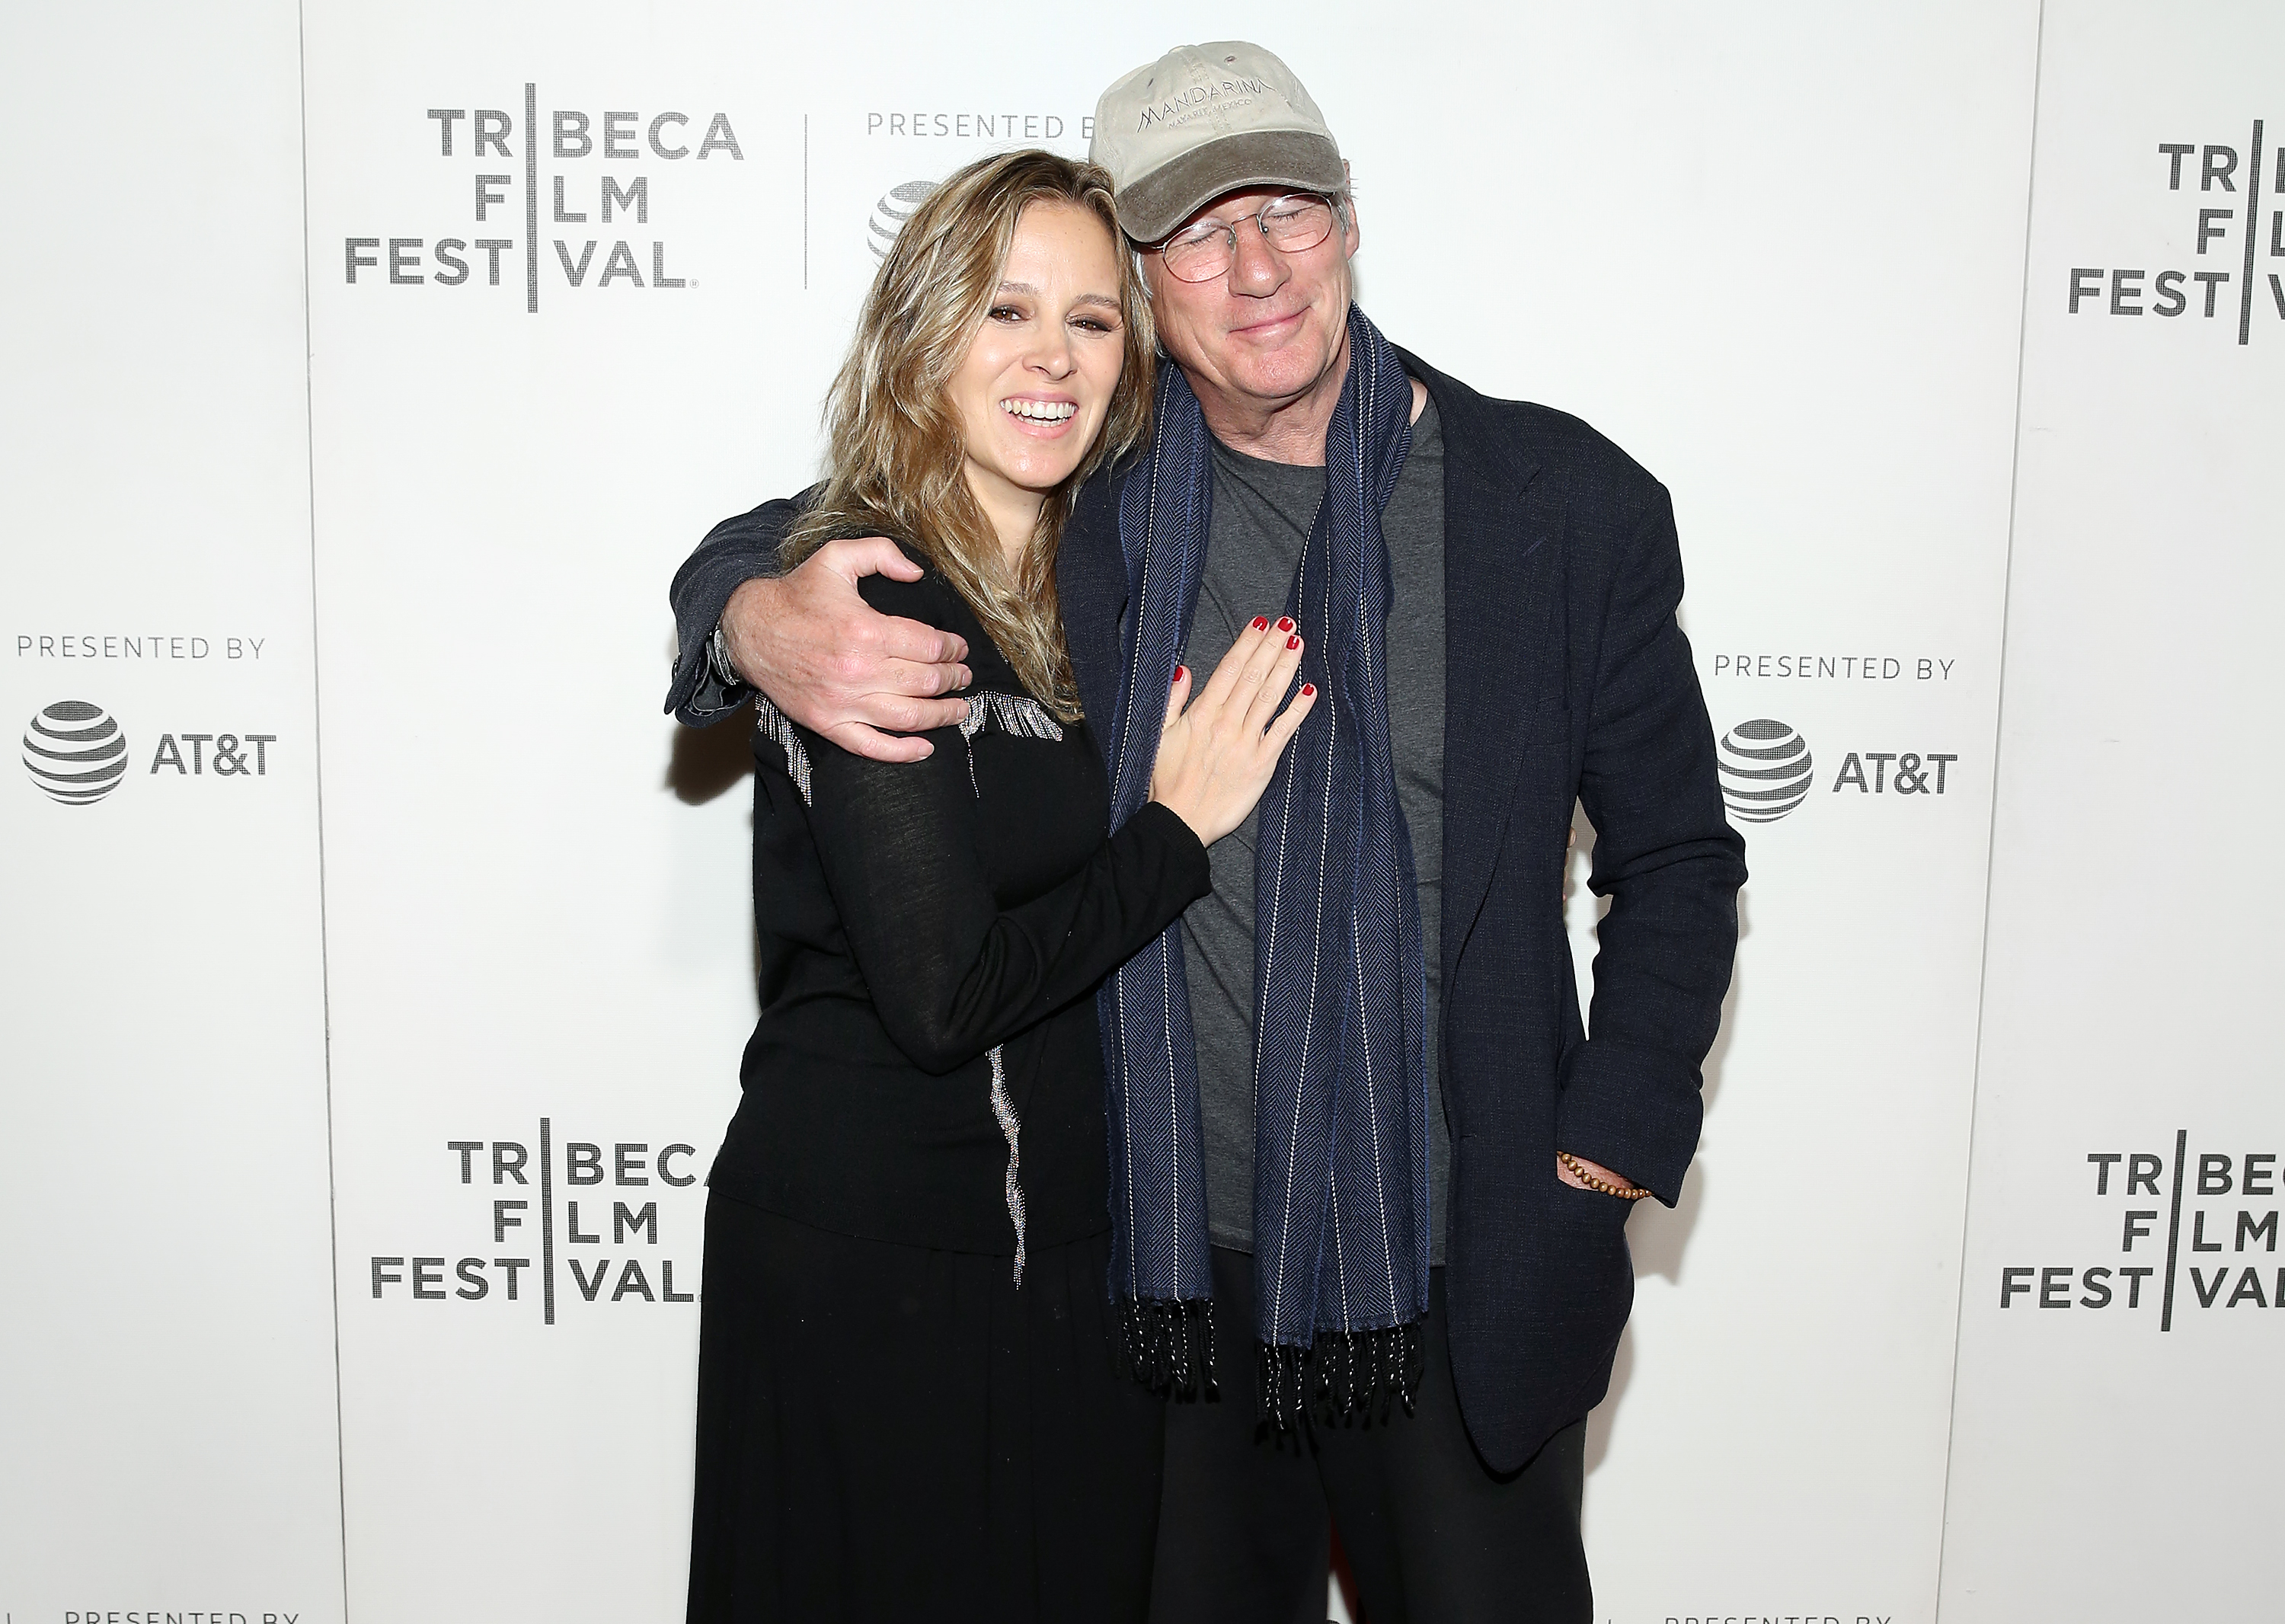 Alejandra Silva and Richard Gere at the Tribeca Film Festival in New York City on May 3, 2019 | Source: Getty Images